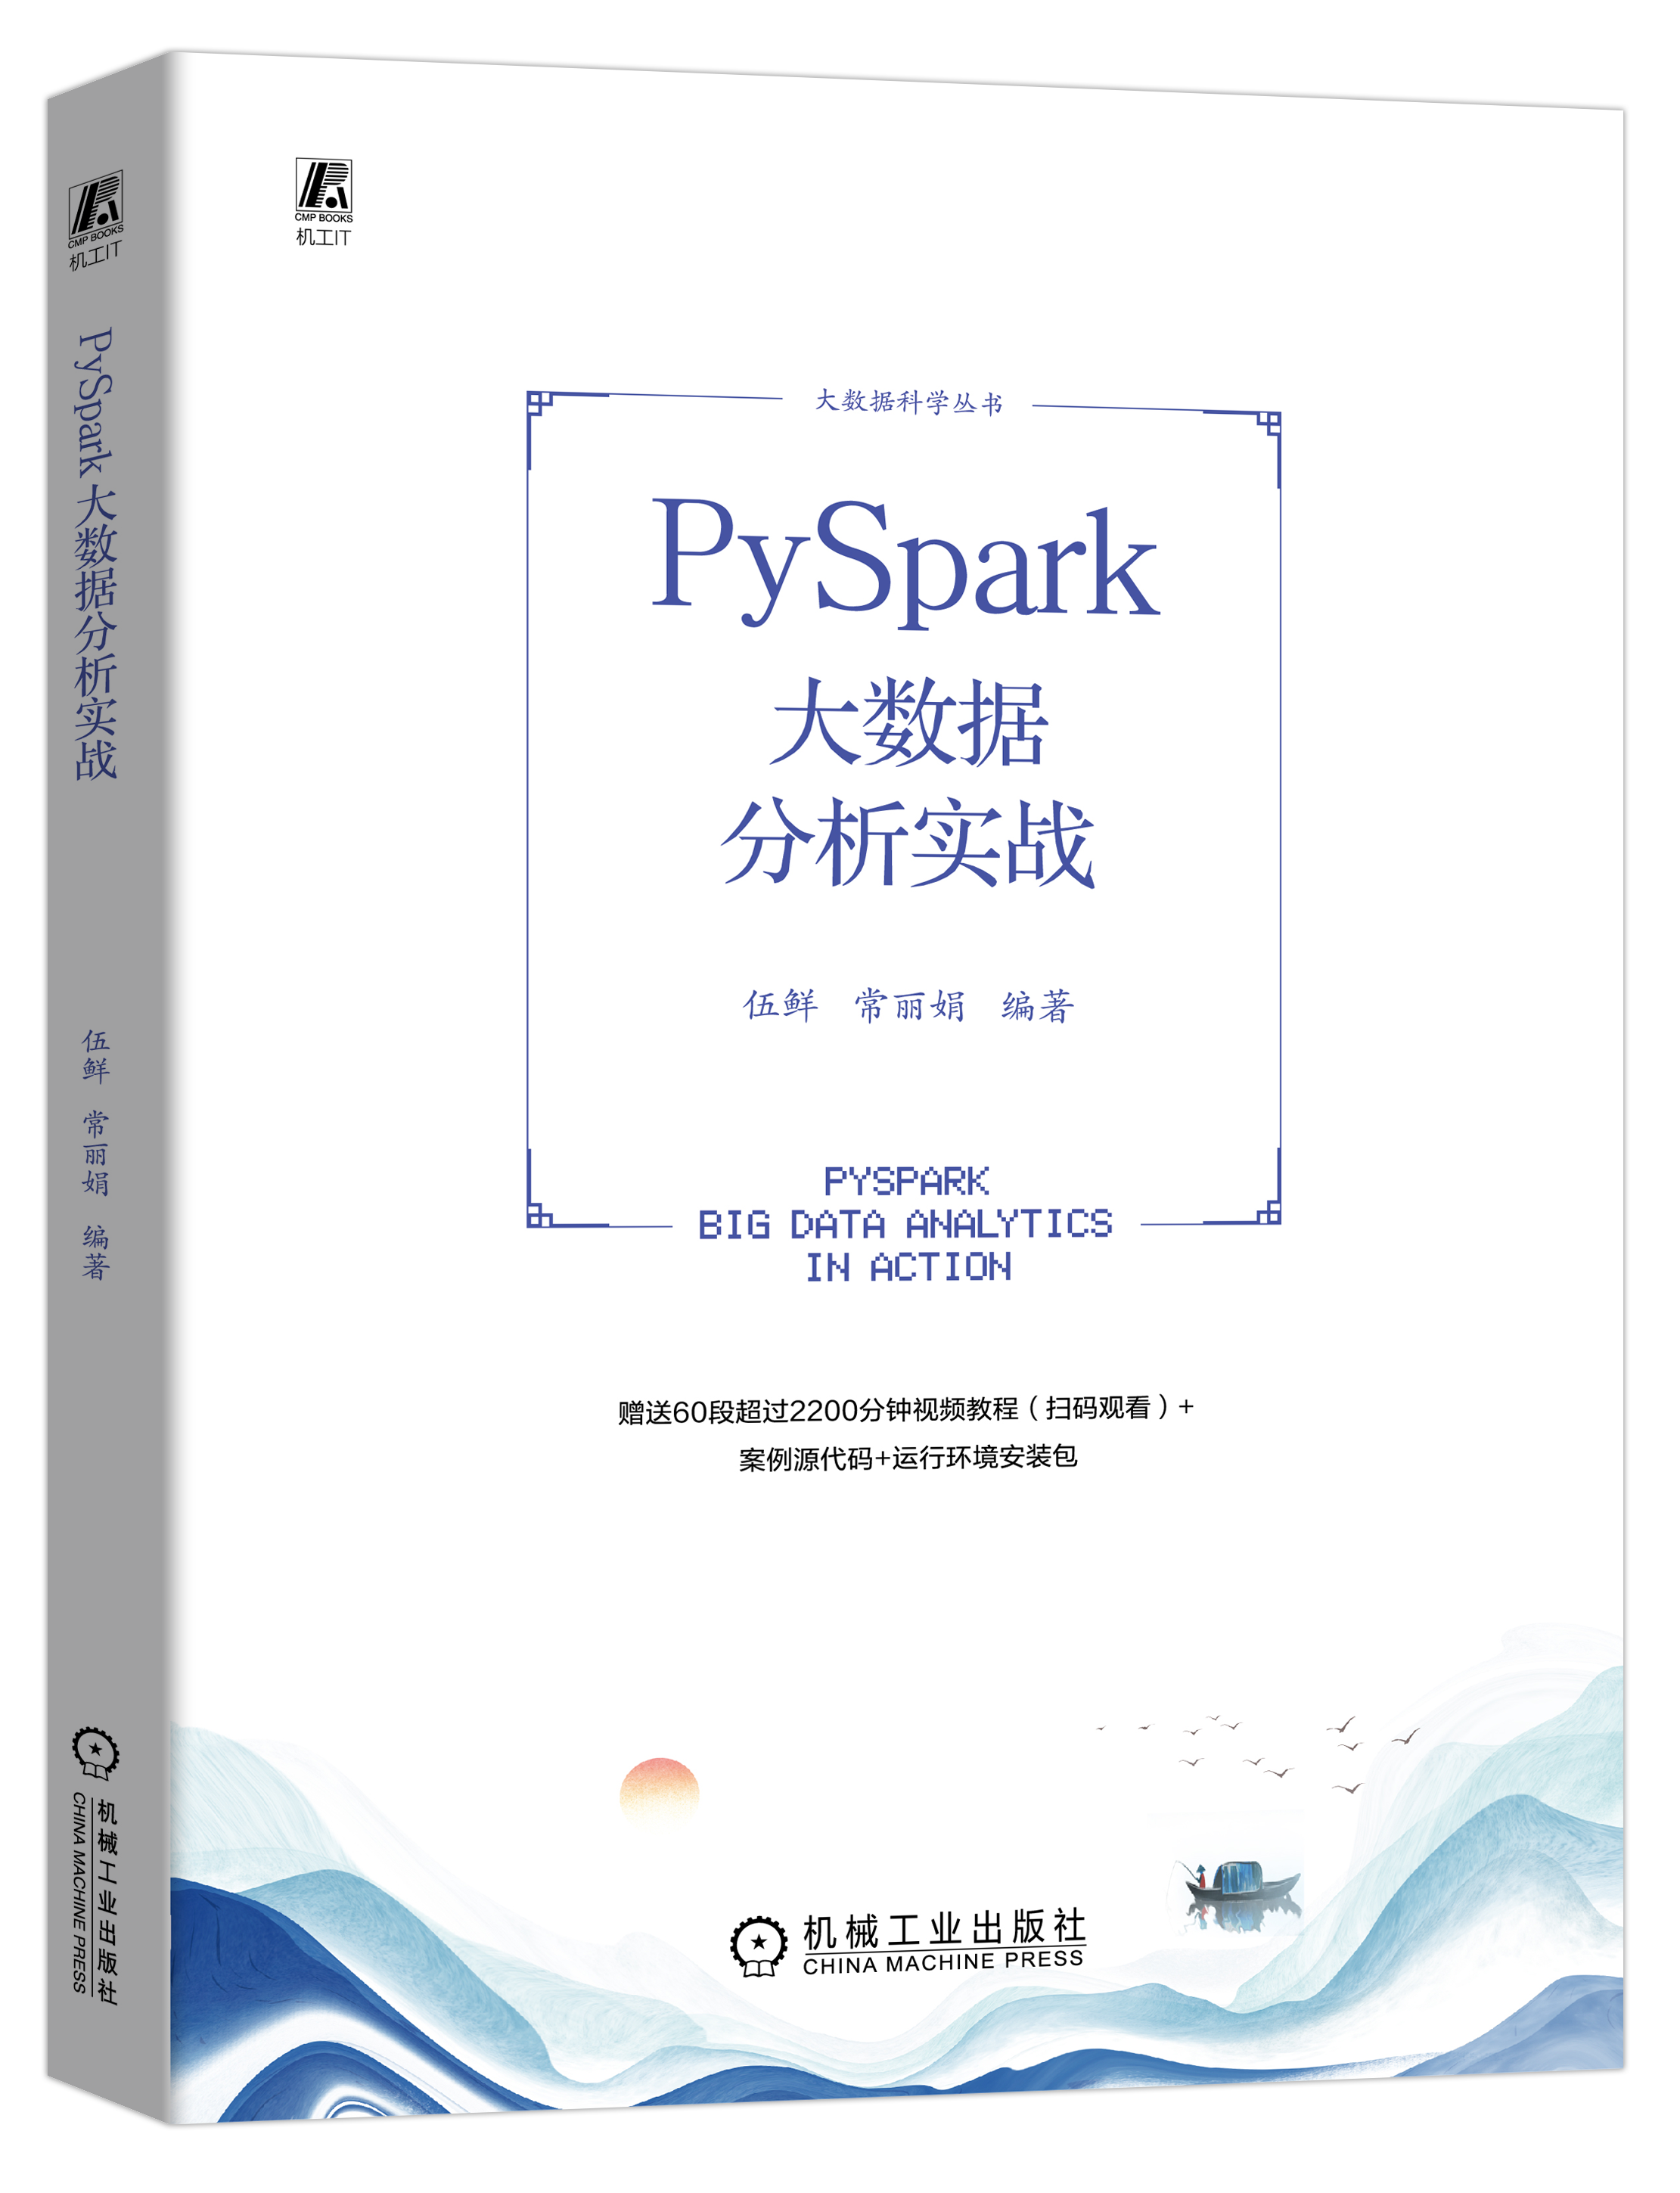 《PySpark<span style='color:red;'>大</span><span style='color:red;'>数据</span>分析实战》-18.<span style='color:red;'>什么</span><span style='color:red;'>是</span><span style='color:red;'>数据</span>分析